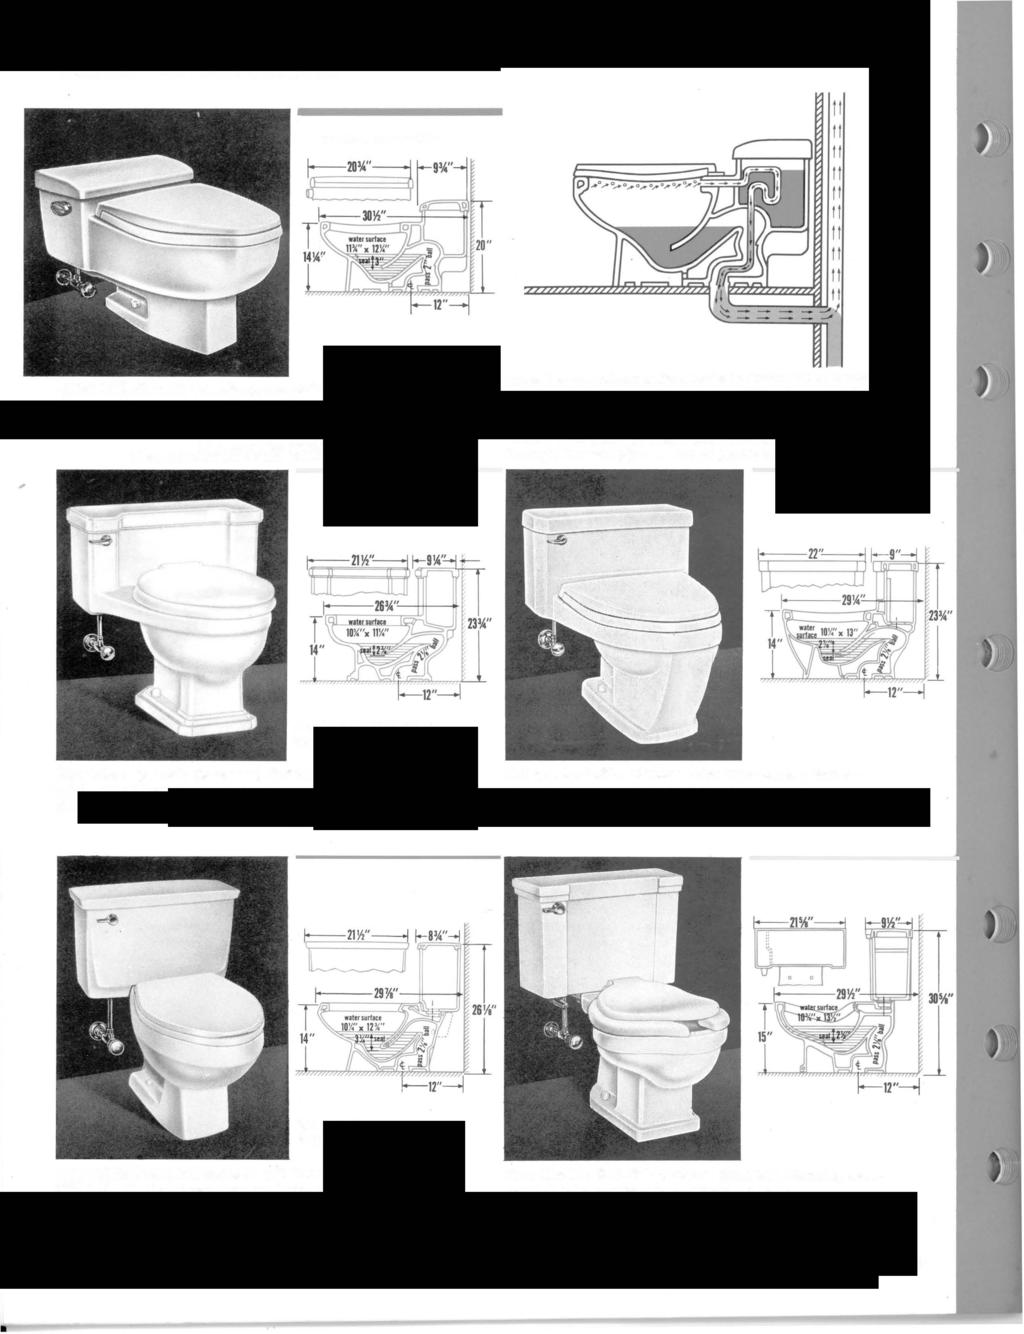 16 toilet combinations nominal dimensions Luxor 2003.010 with Vent-Away/2003.